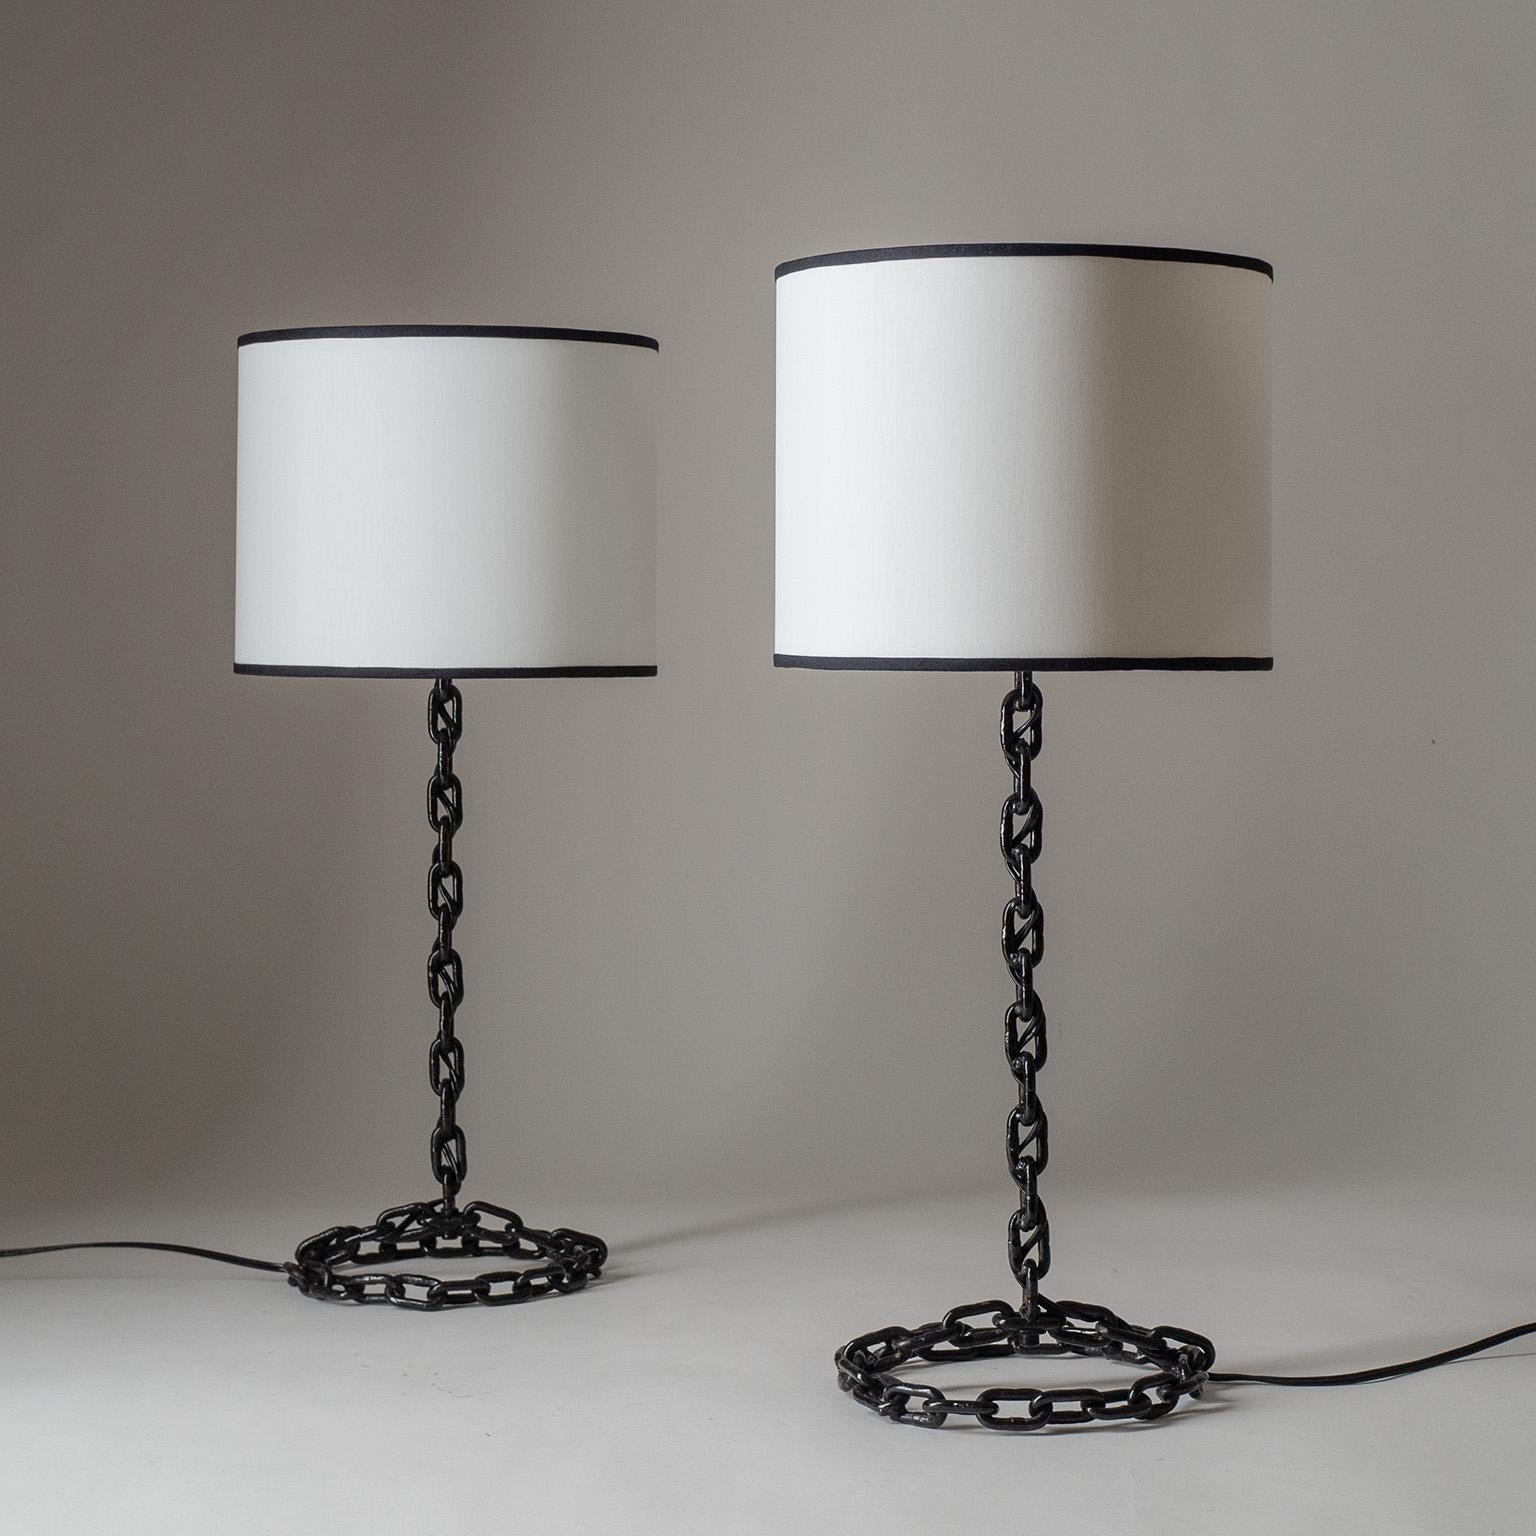 Fine pair of French Brutalist chain link table lamps from 1960-1970s. Original B22 sockets with new custom shades. Height without the shade is approximately 43cm (17?), shade height 20cm (8?).